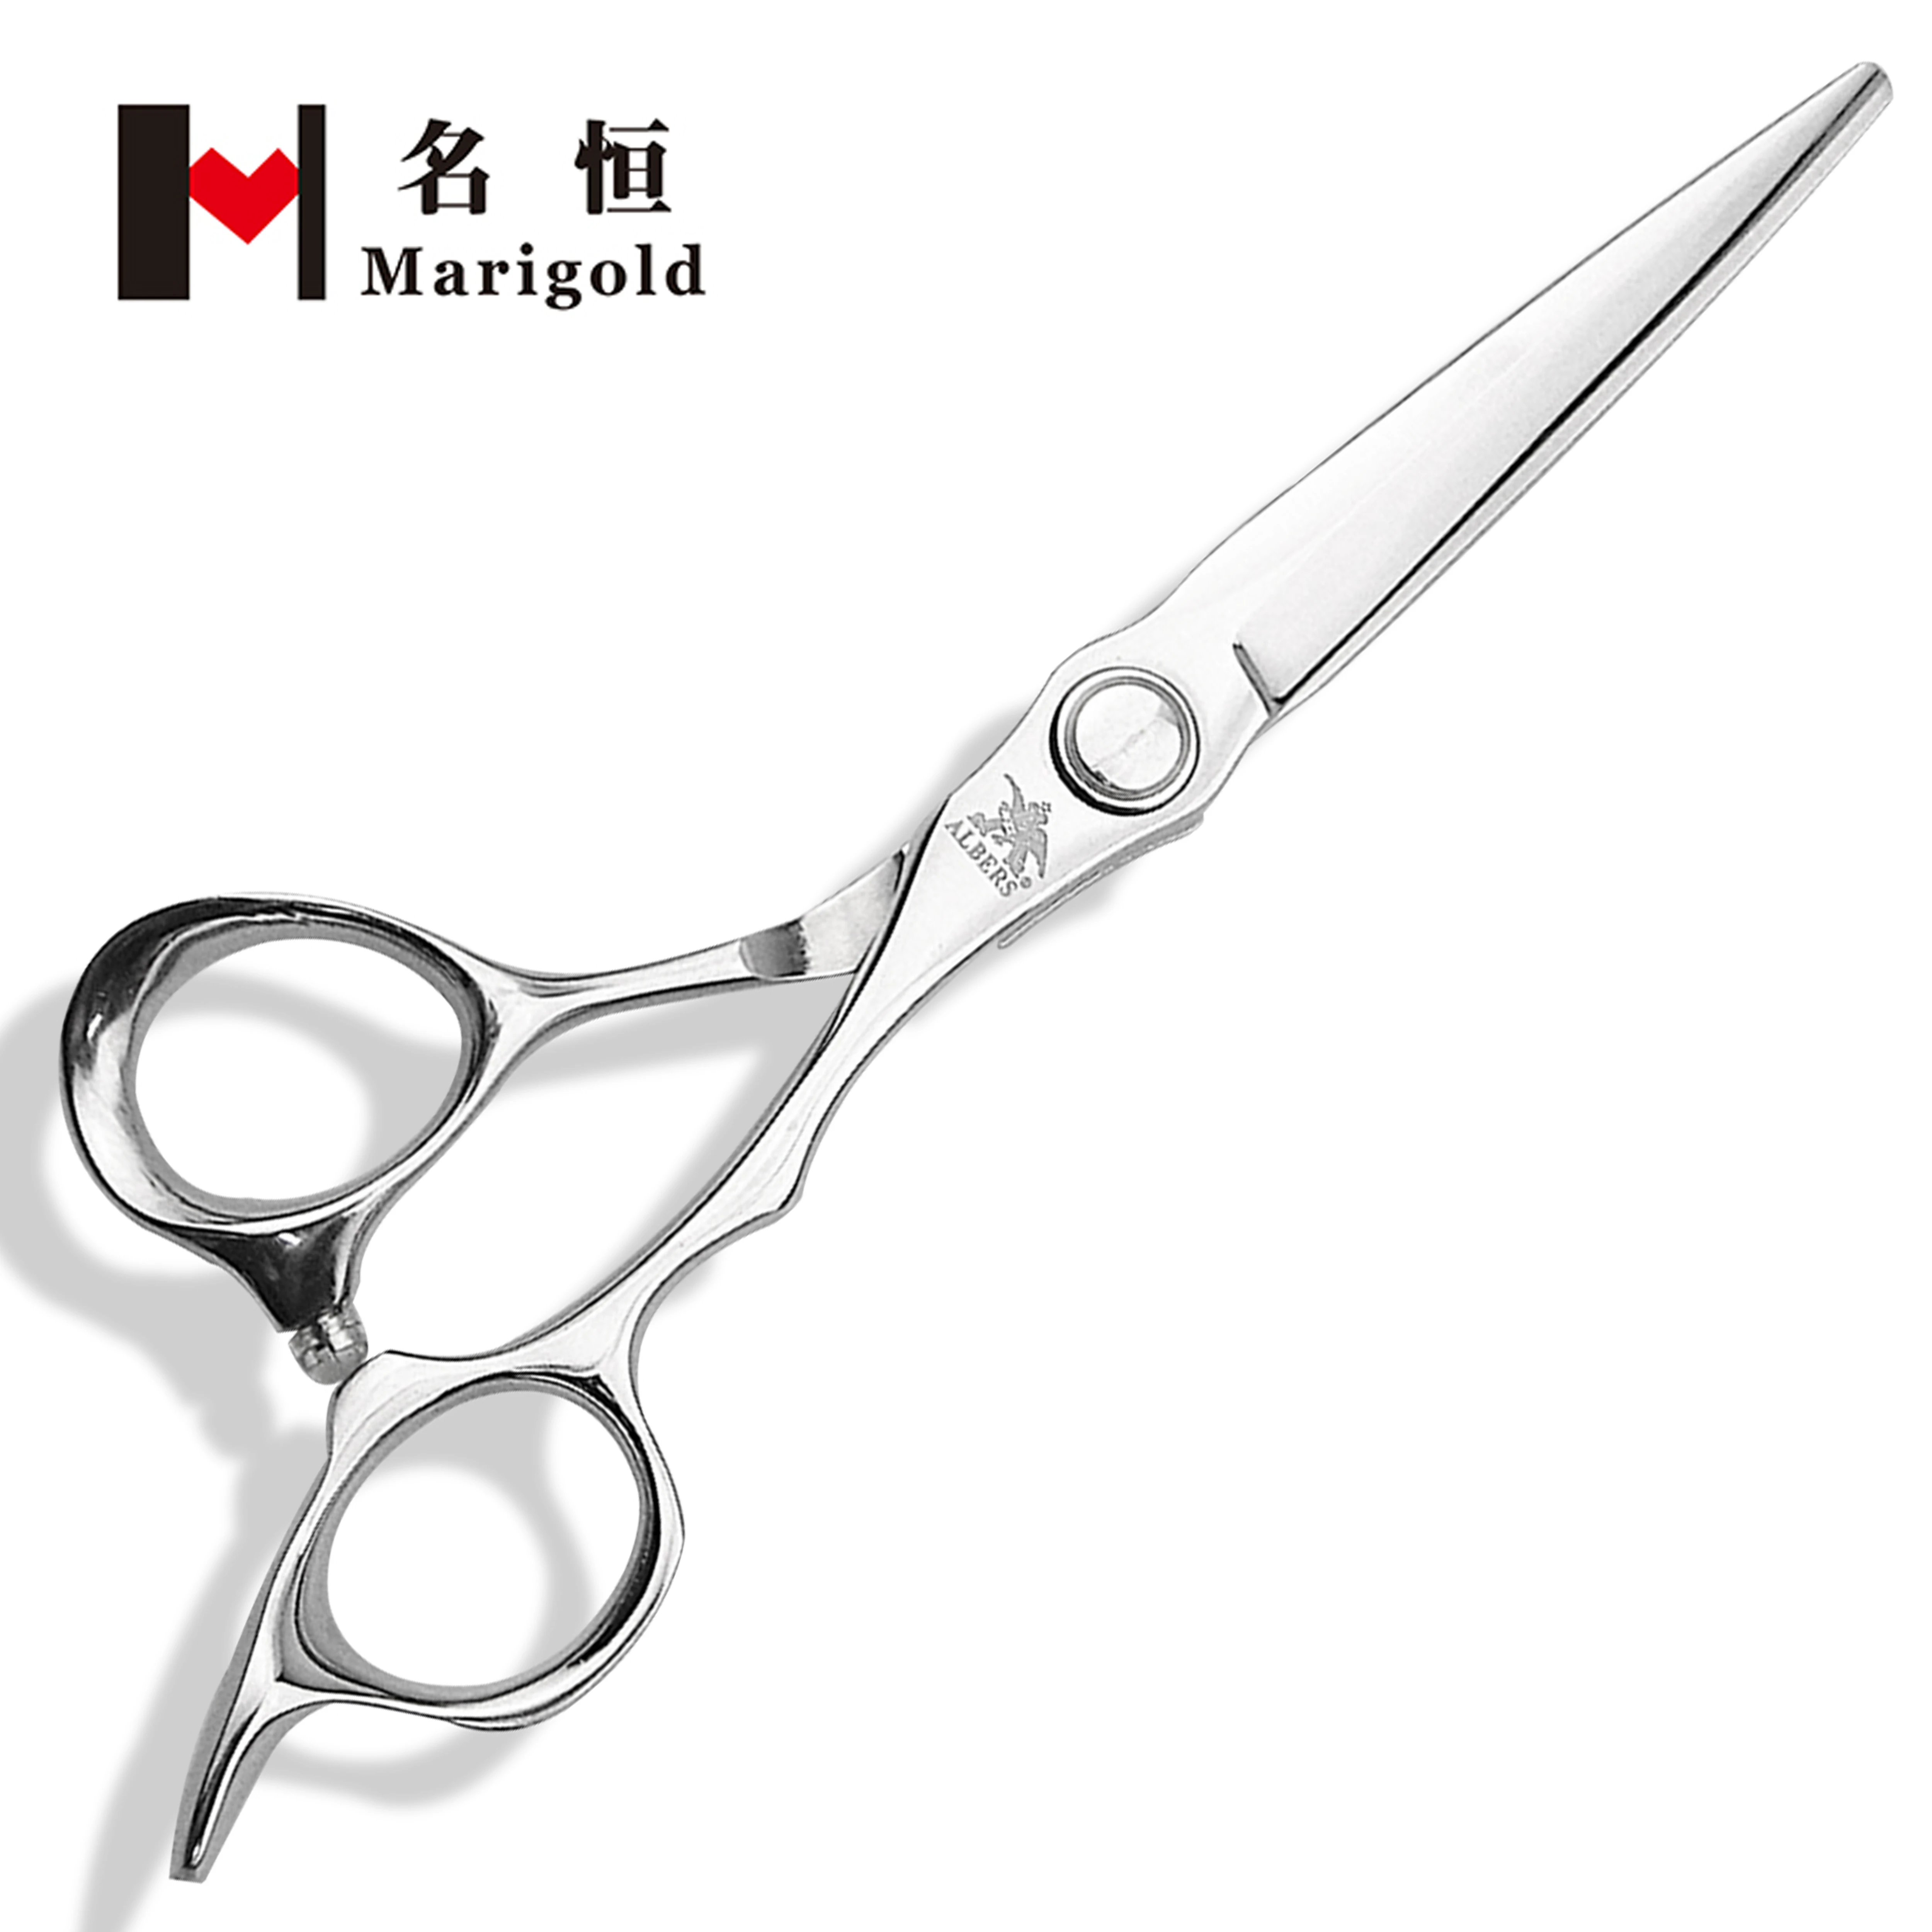 

Marigold 6inch professional hair styling tools barber scissors hairdressing vg10 scissors, Silver